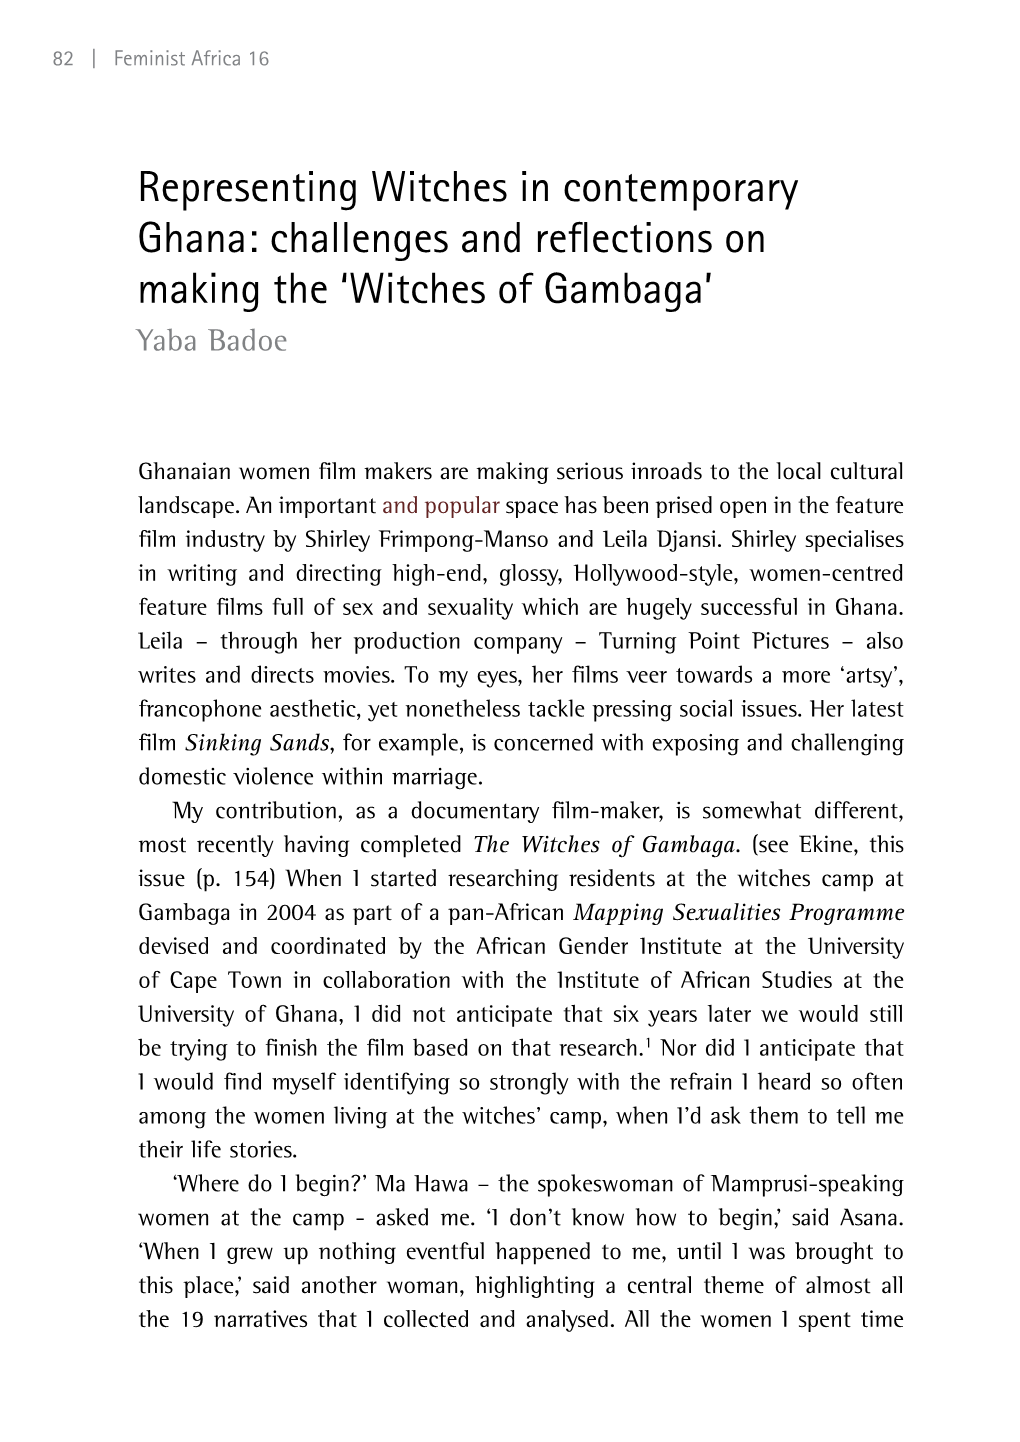 Representing Witches in Contemporary Ghana: Challenges and Reflections on Making the ‘Witches of Gambaga’ Yaba Badoe